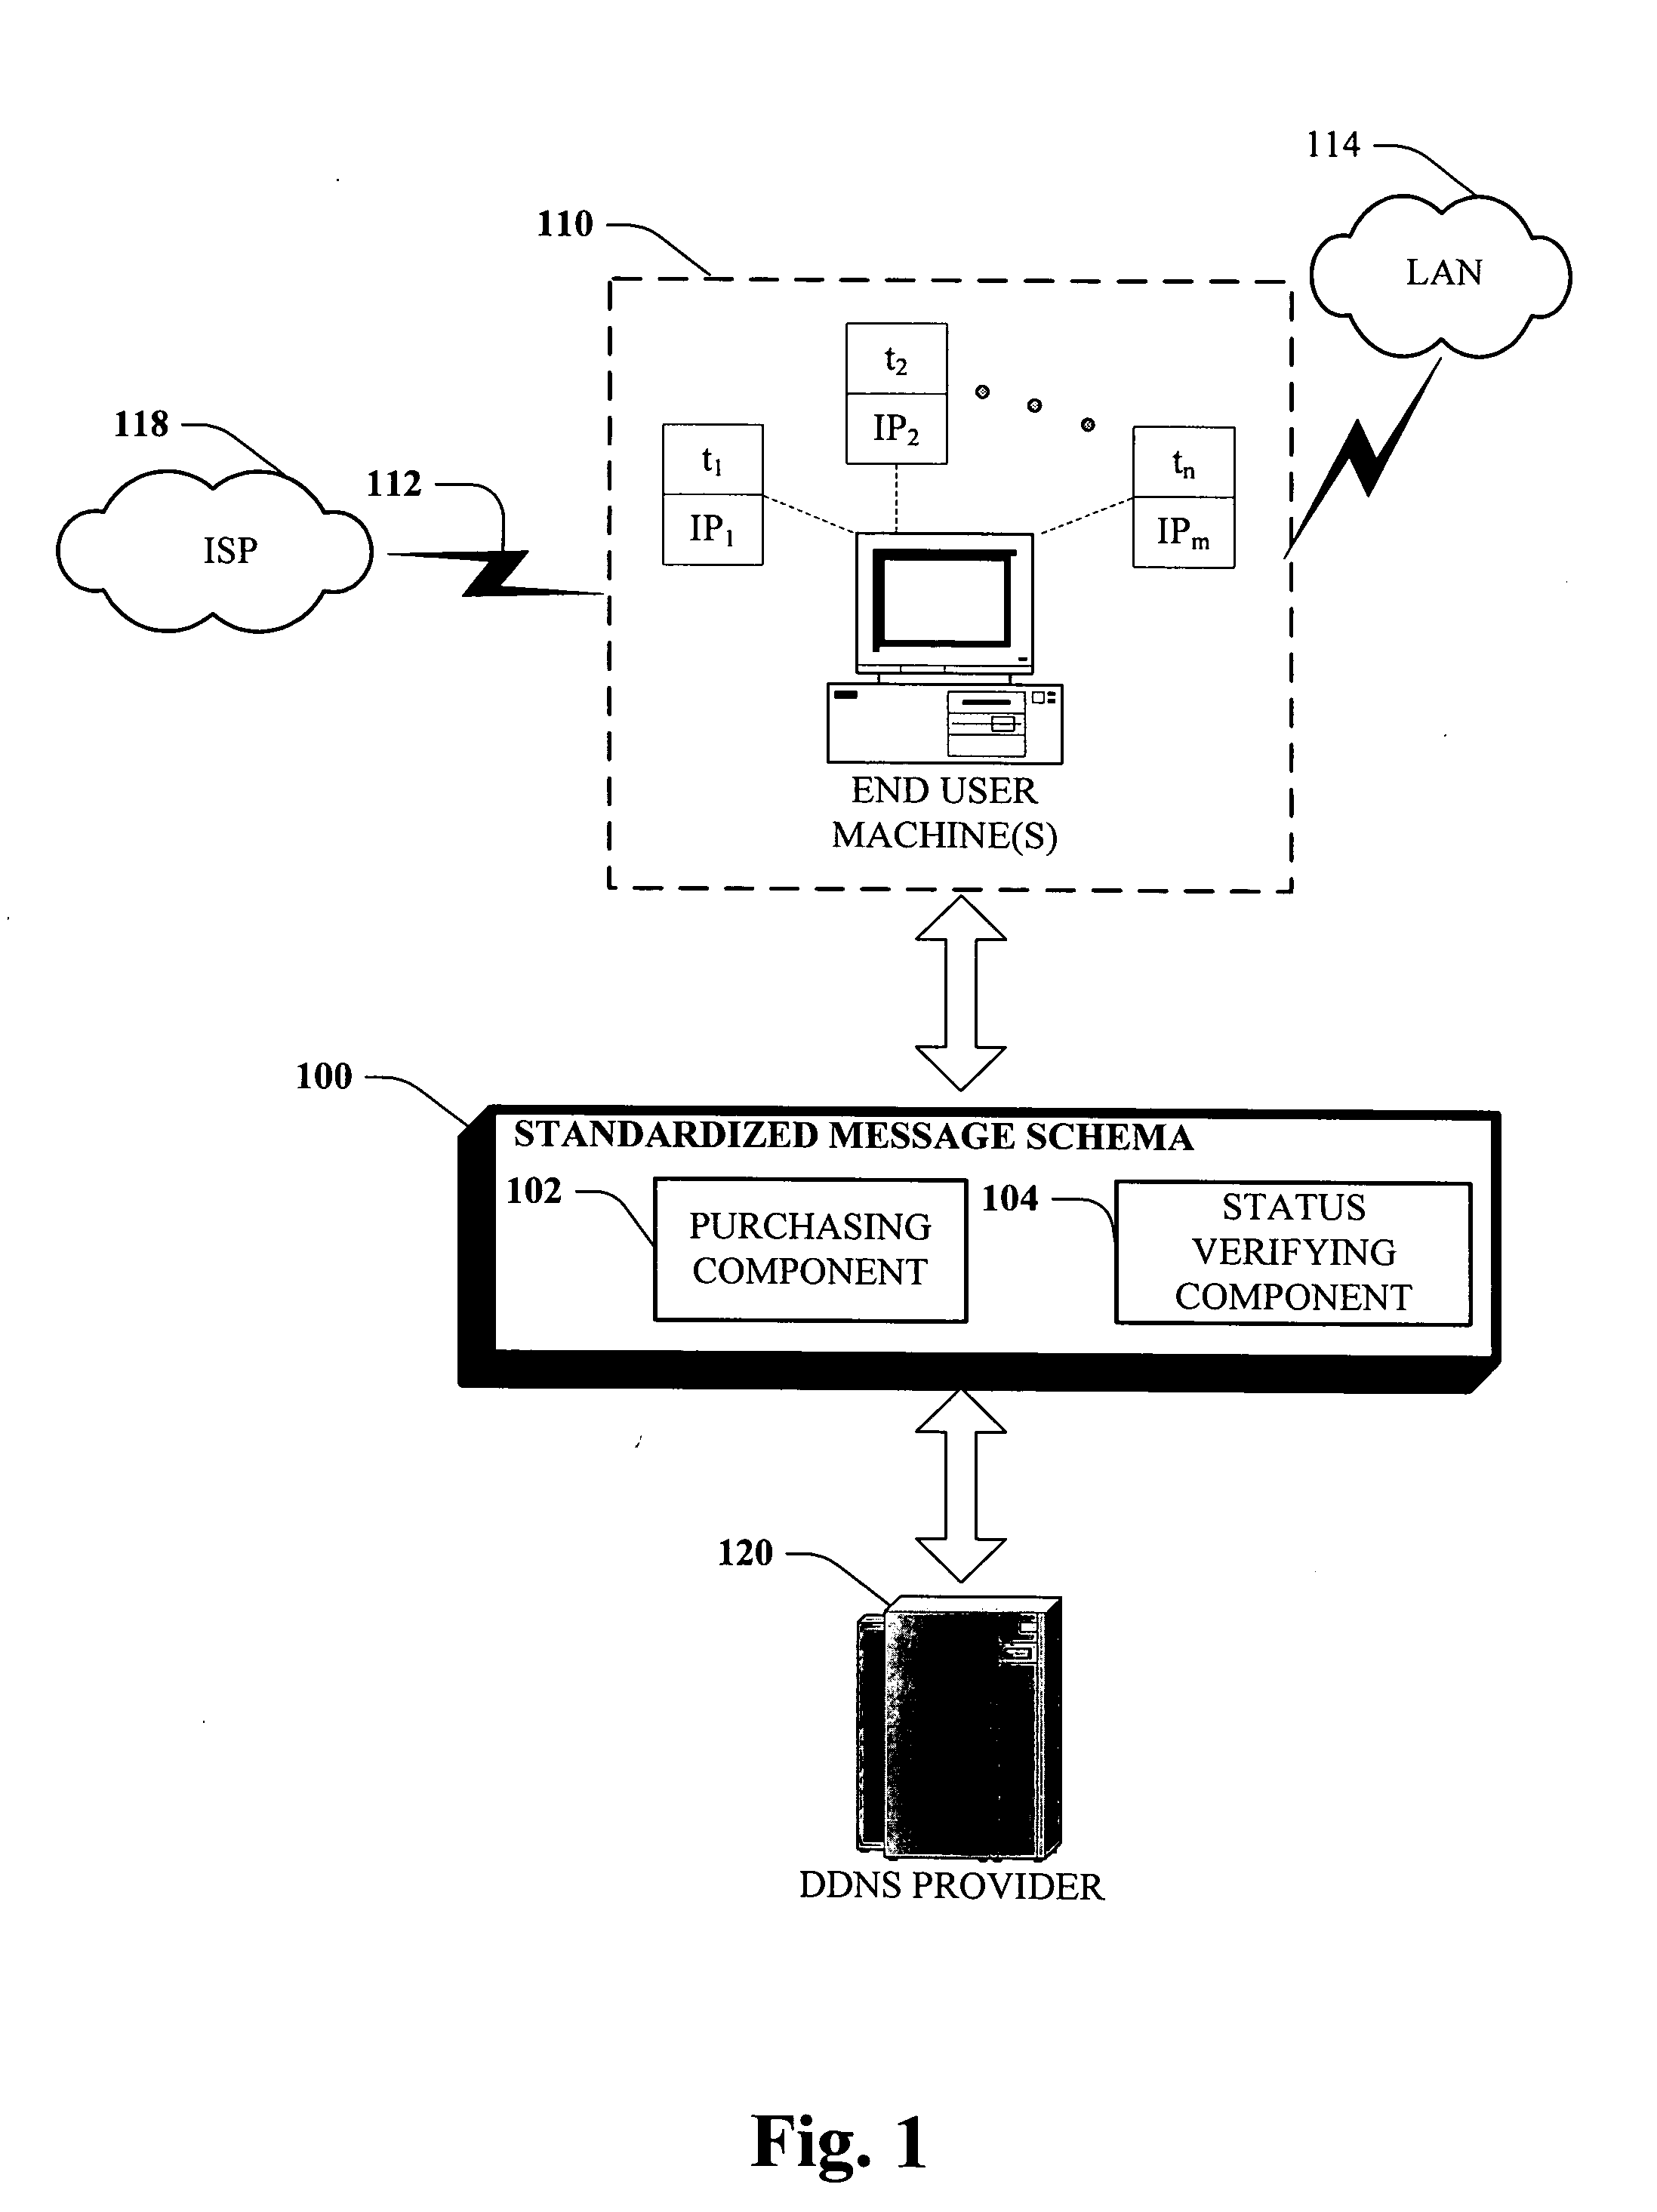 Message based network configuration of dynamic domain name services